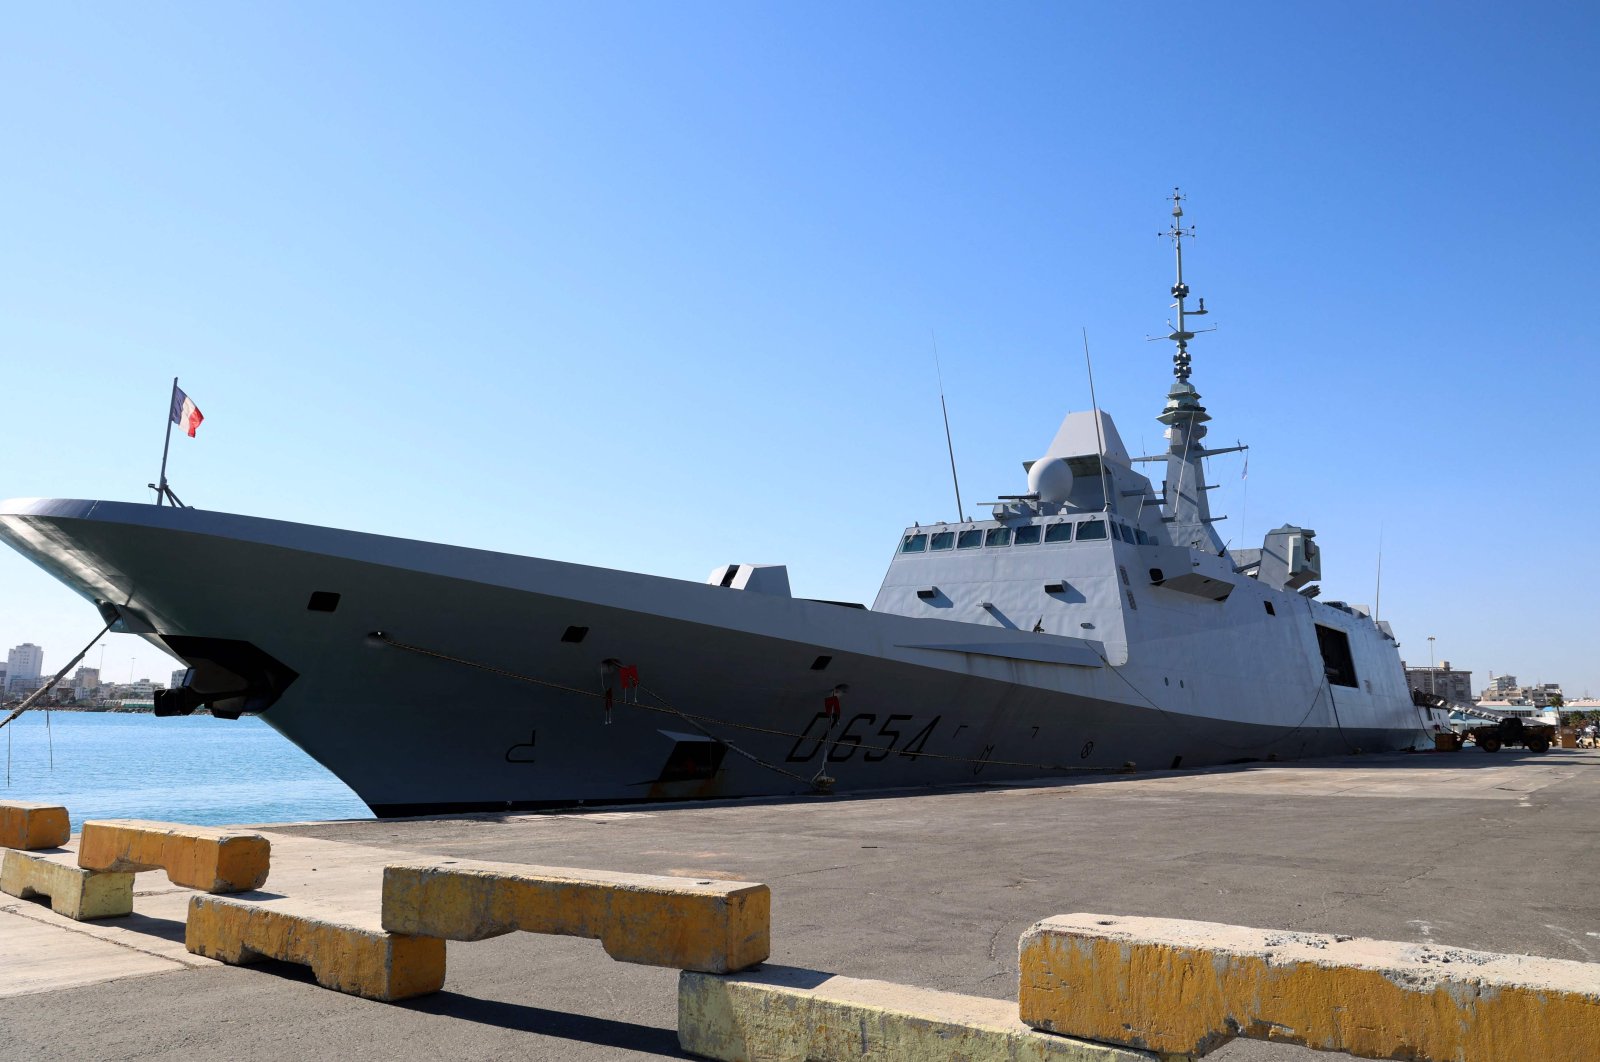 The French multi-mission frigate Auvergne is docked at the port of the Greek Cypriot coastal city of Larnaca, Nov. 8, 2021. (AFP Photo)